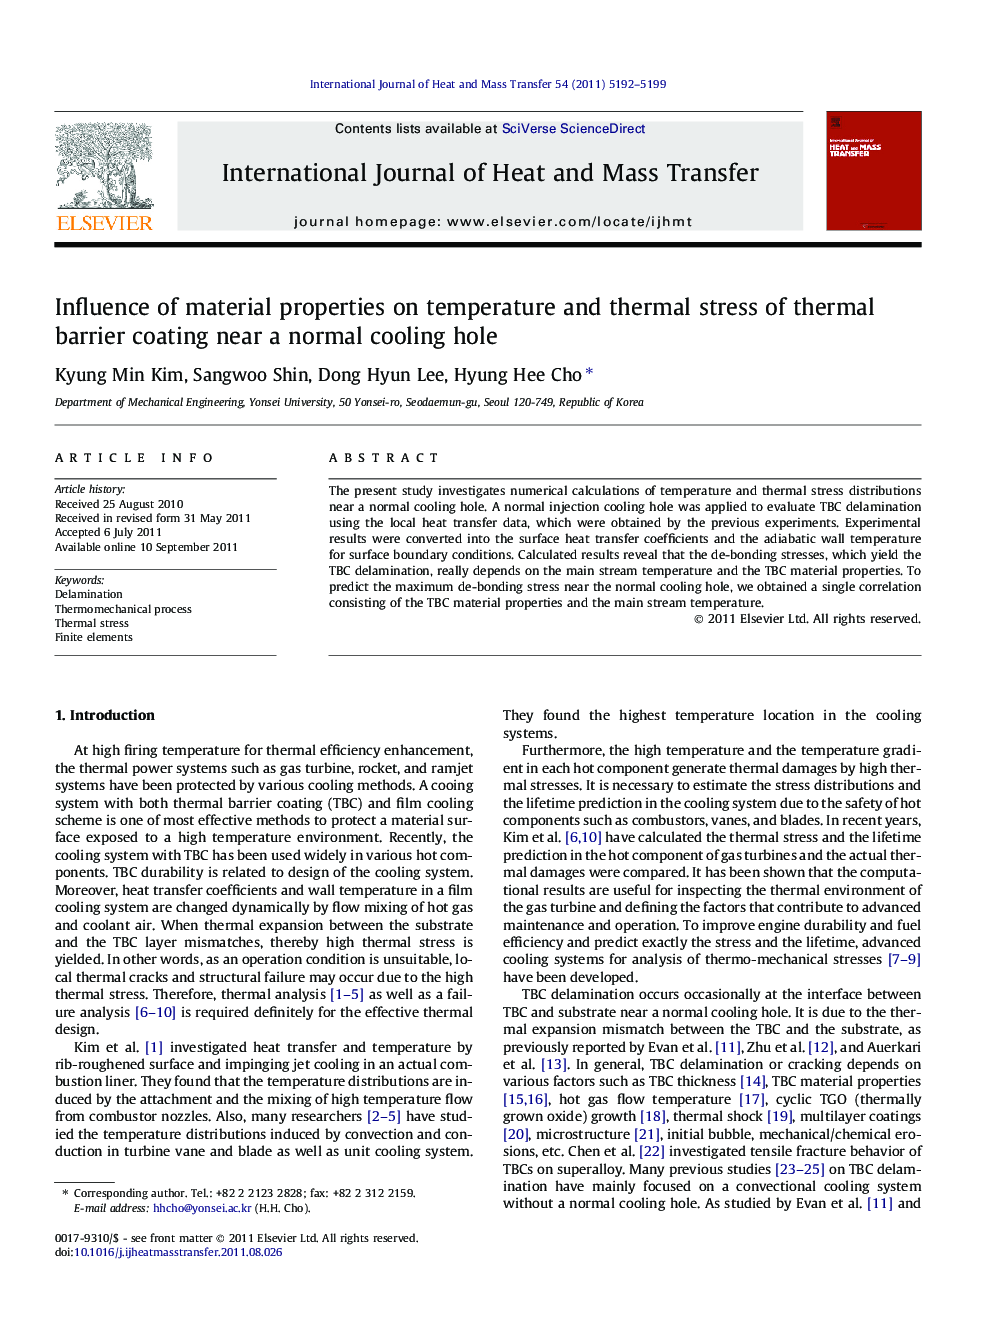 Influence of material properties on temperature and thermal stress of thermal barrier coating near a normal cooling hole